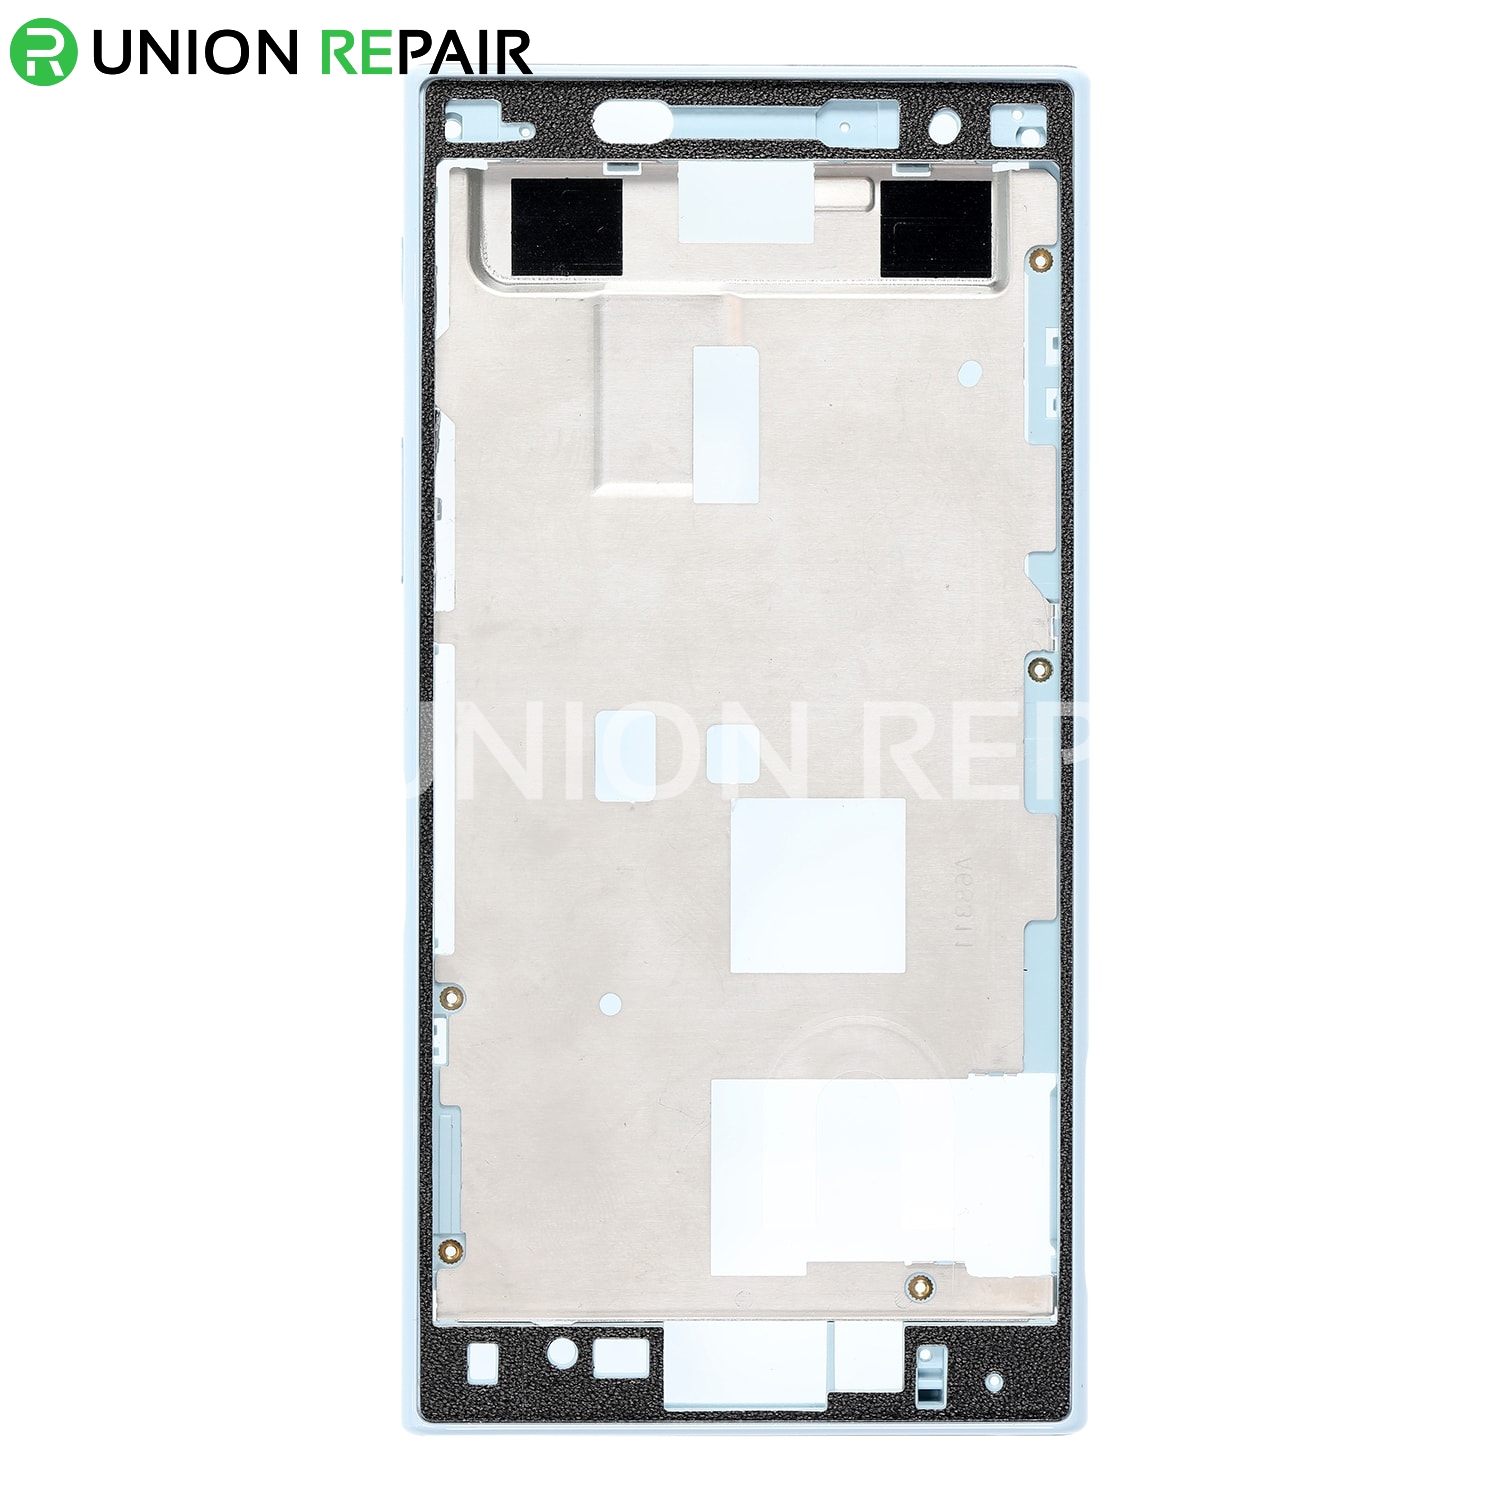 Replacement for Sony Xperia X Compact/Mini Middle Frame Front Housing - Mist Blue